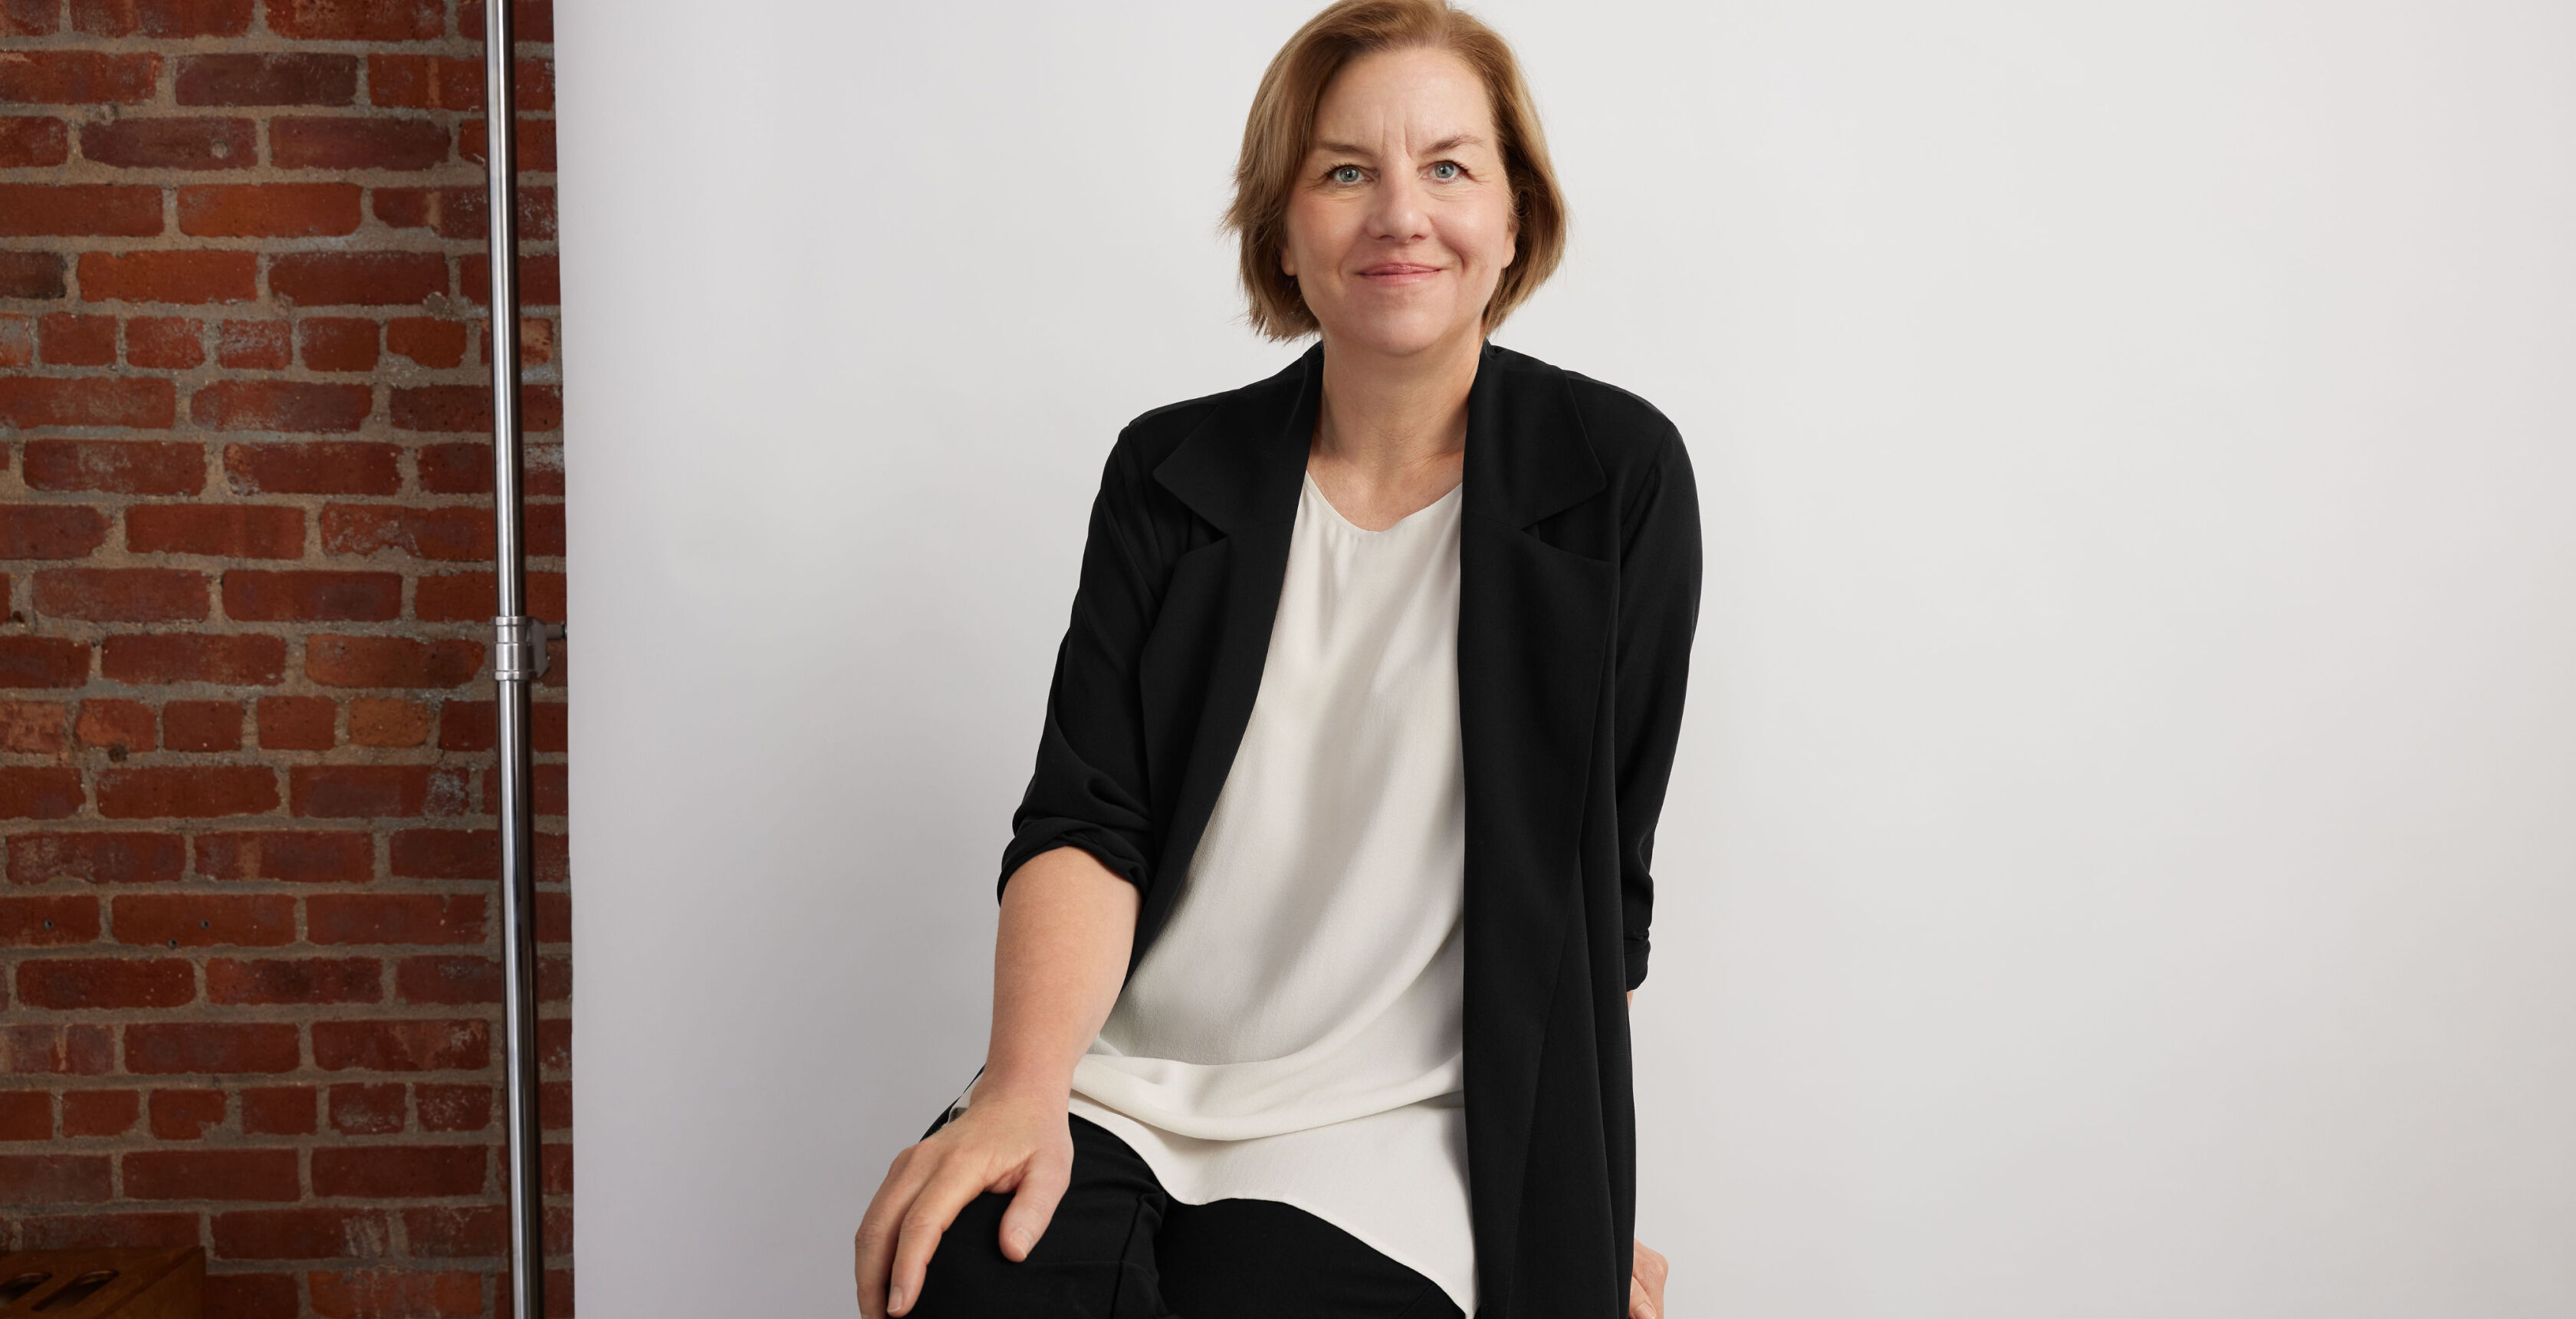 Portrait of Lisa Williams, EILEEN FISHER CEO.